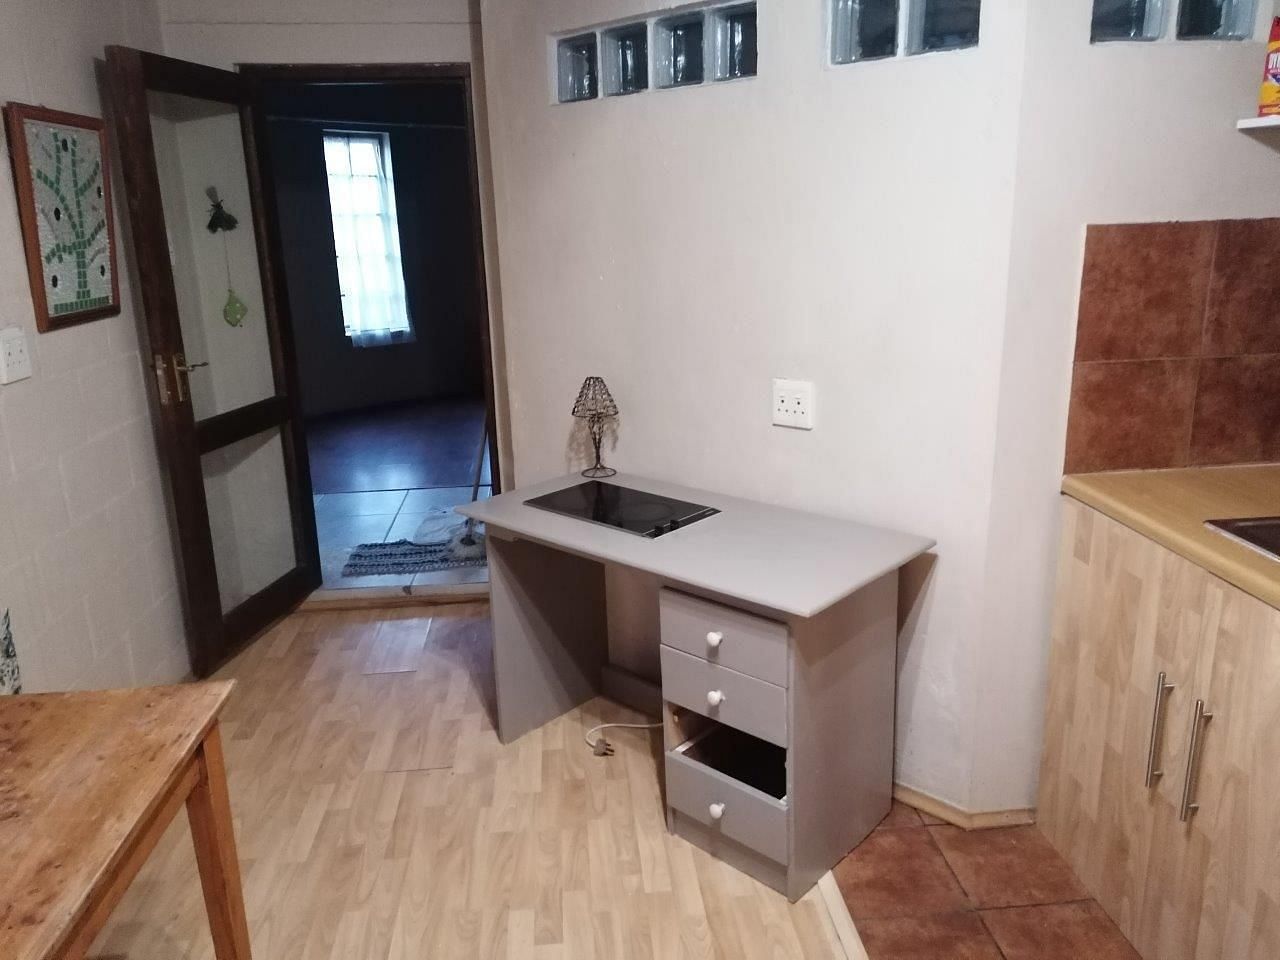 JWguest Apartment at Cape Town, Western Cape | Lovely 1 bedroom apartment in gordons bay south africa | Jwbnb no brobnb 11